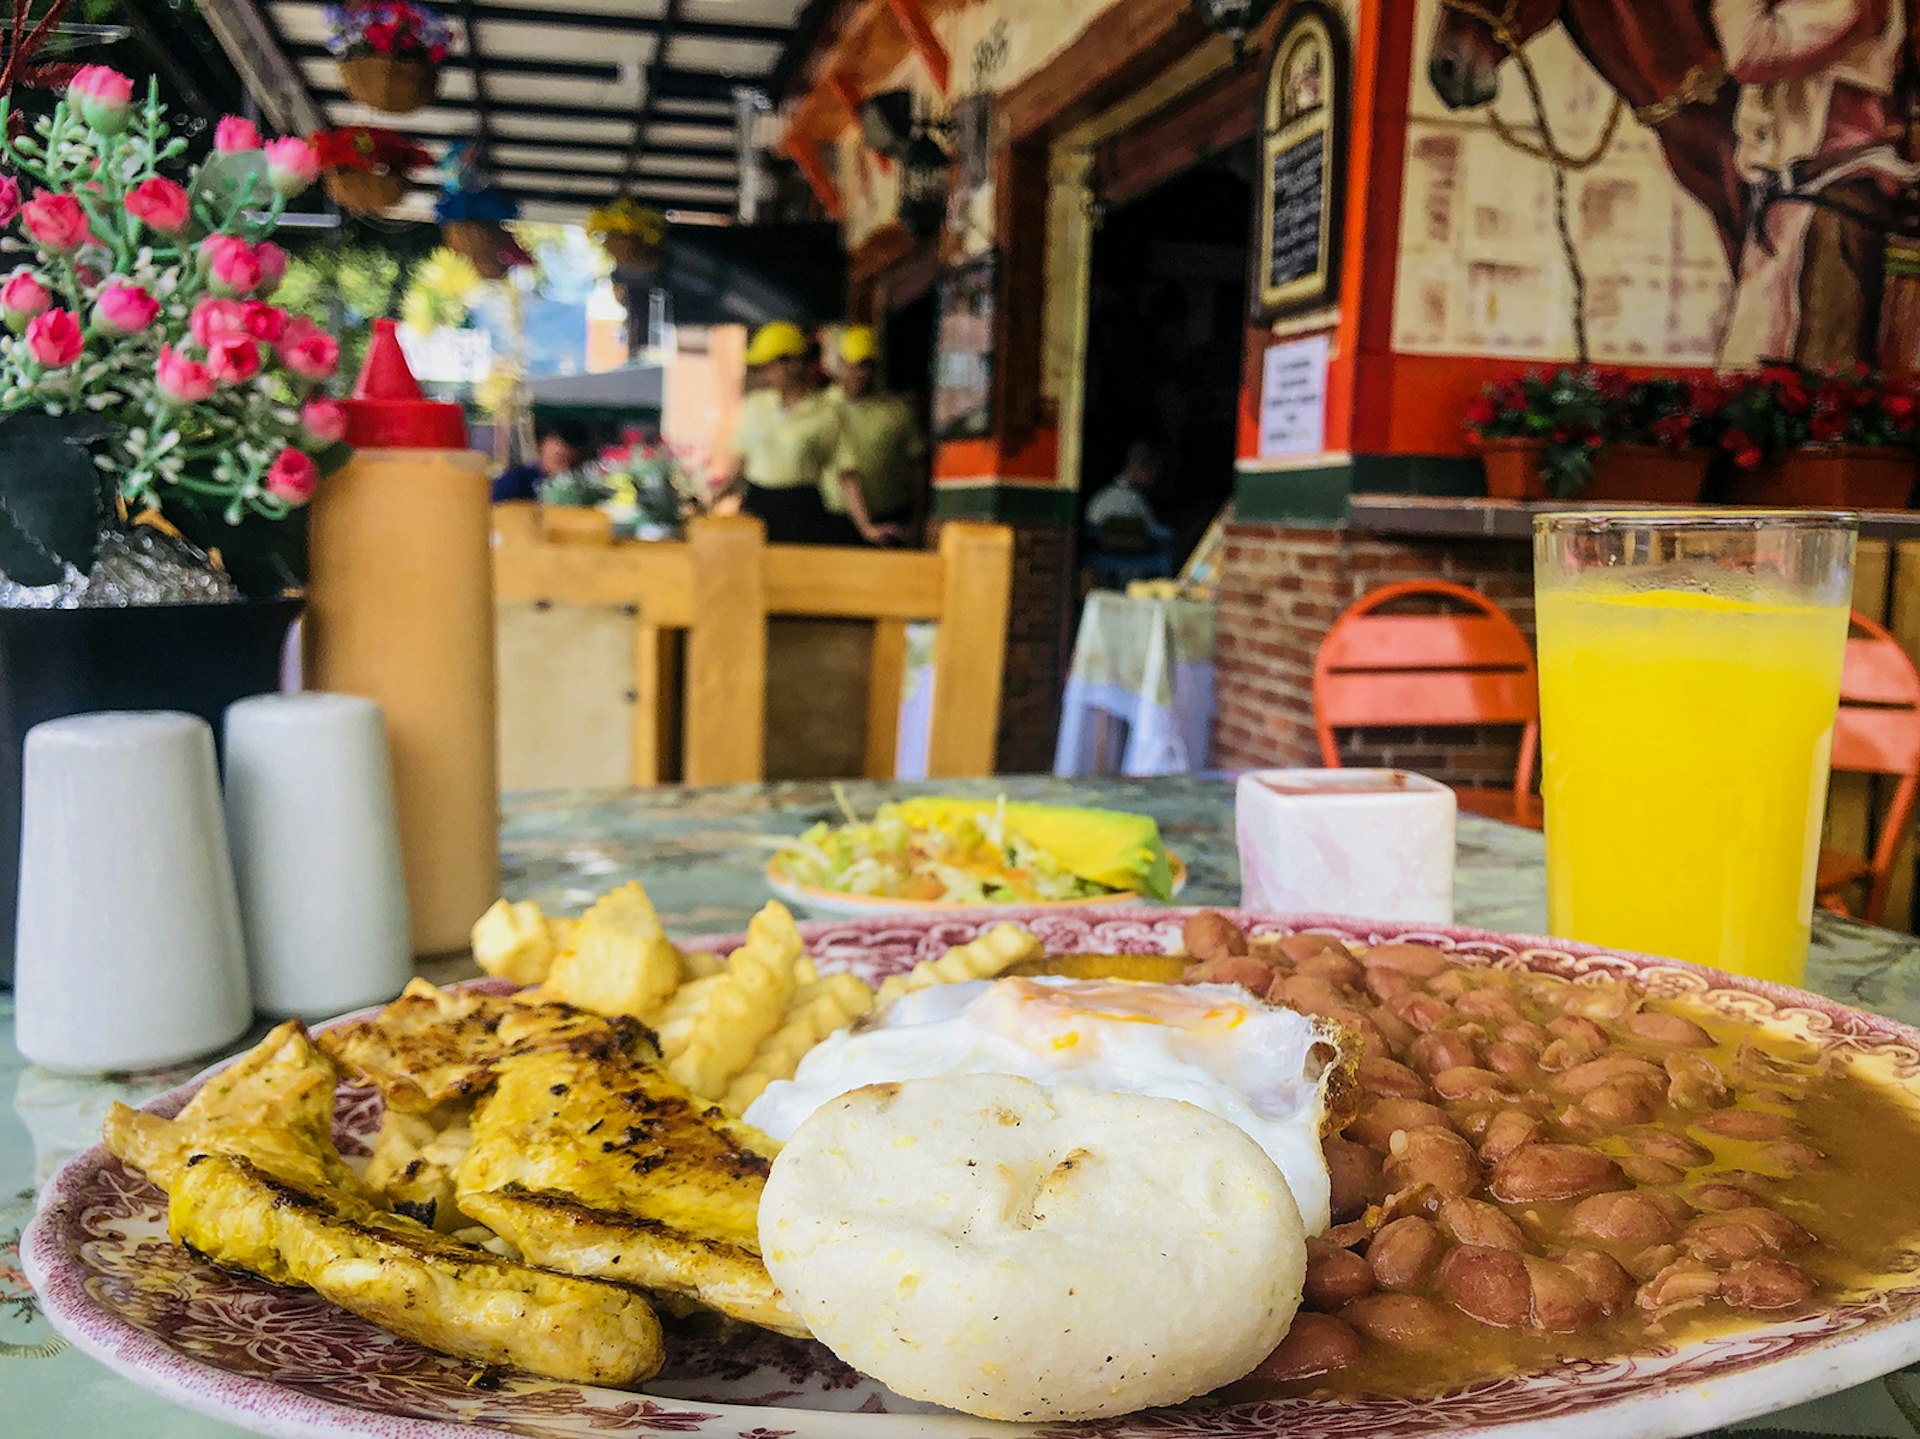 A side view of a plate filled with beans, eggs, fries and arepas and a glass of yellow juice. The background is a colorful restaurant scene in Medellín, Colombia.